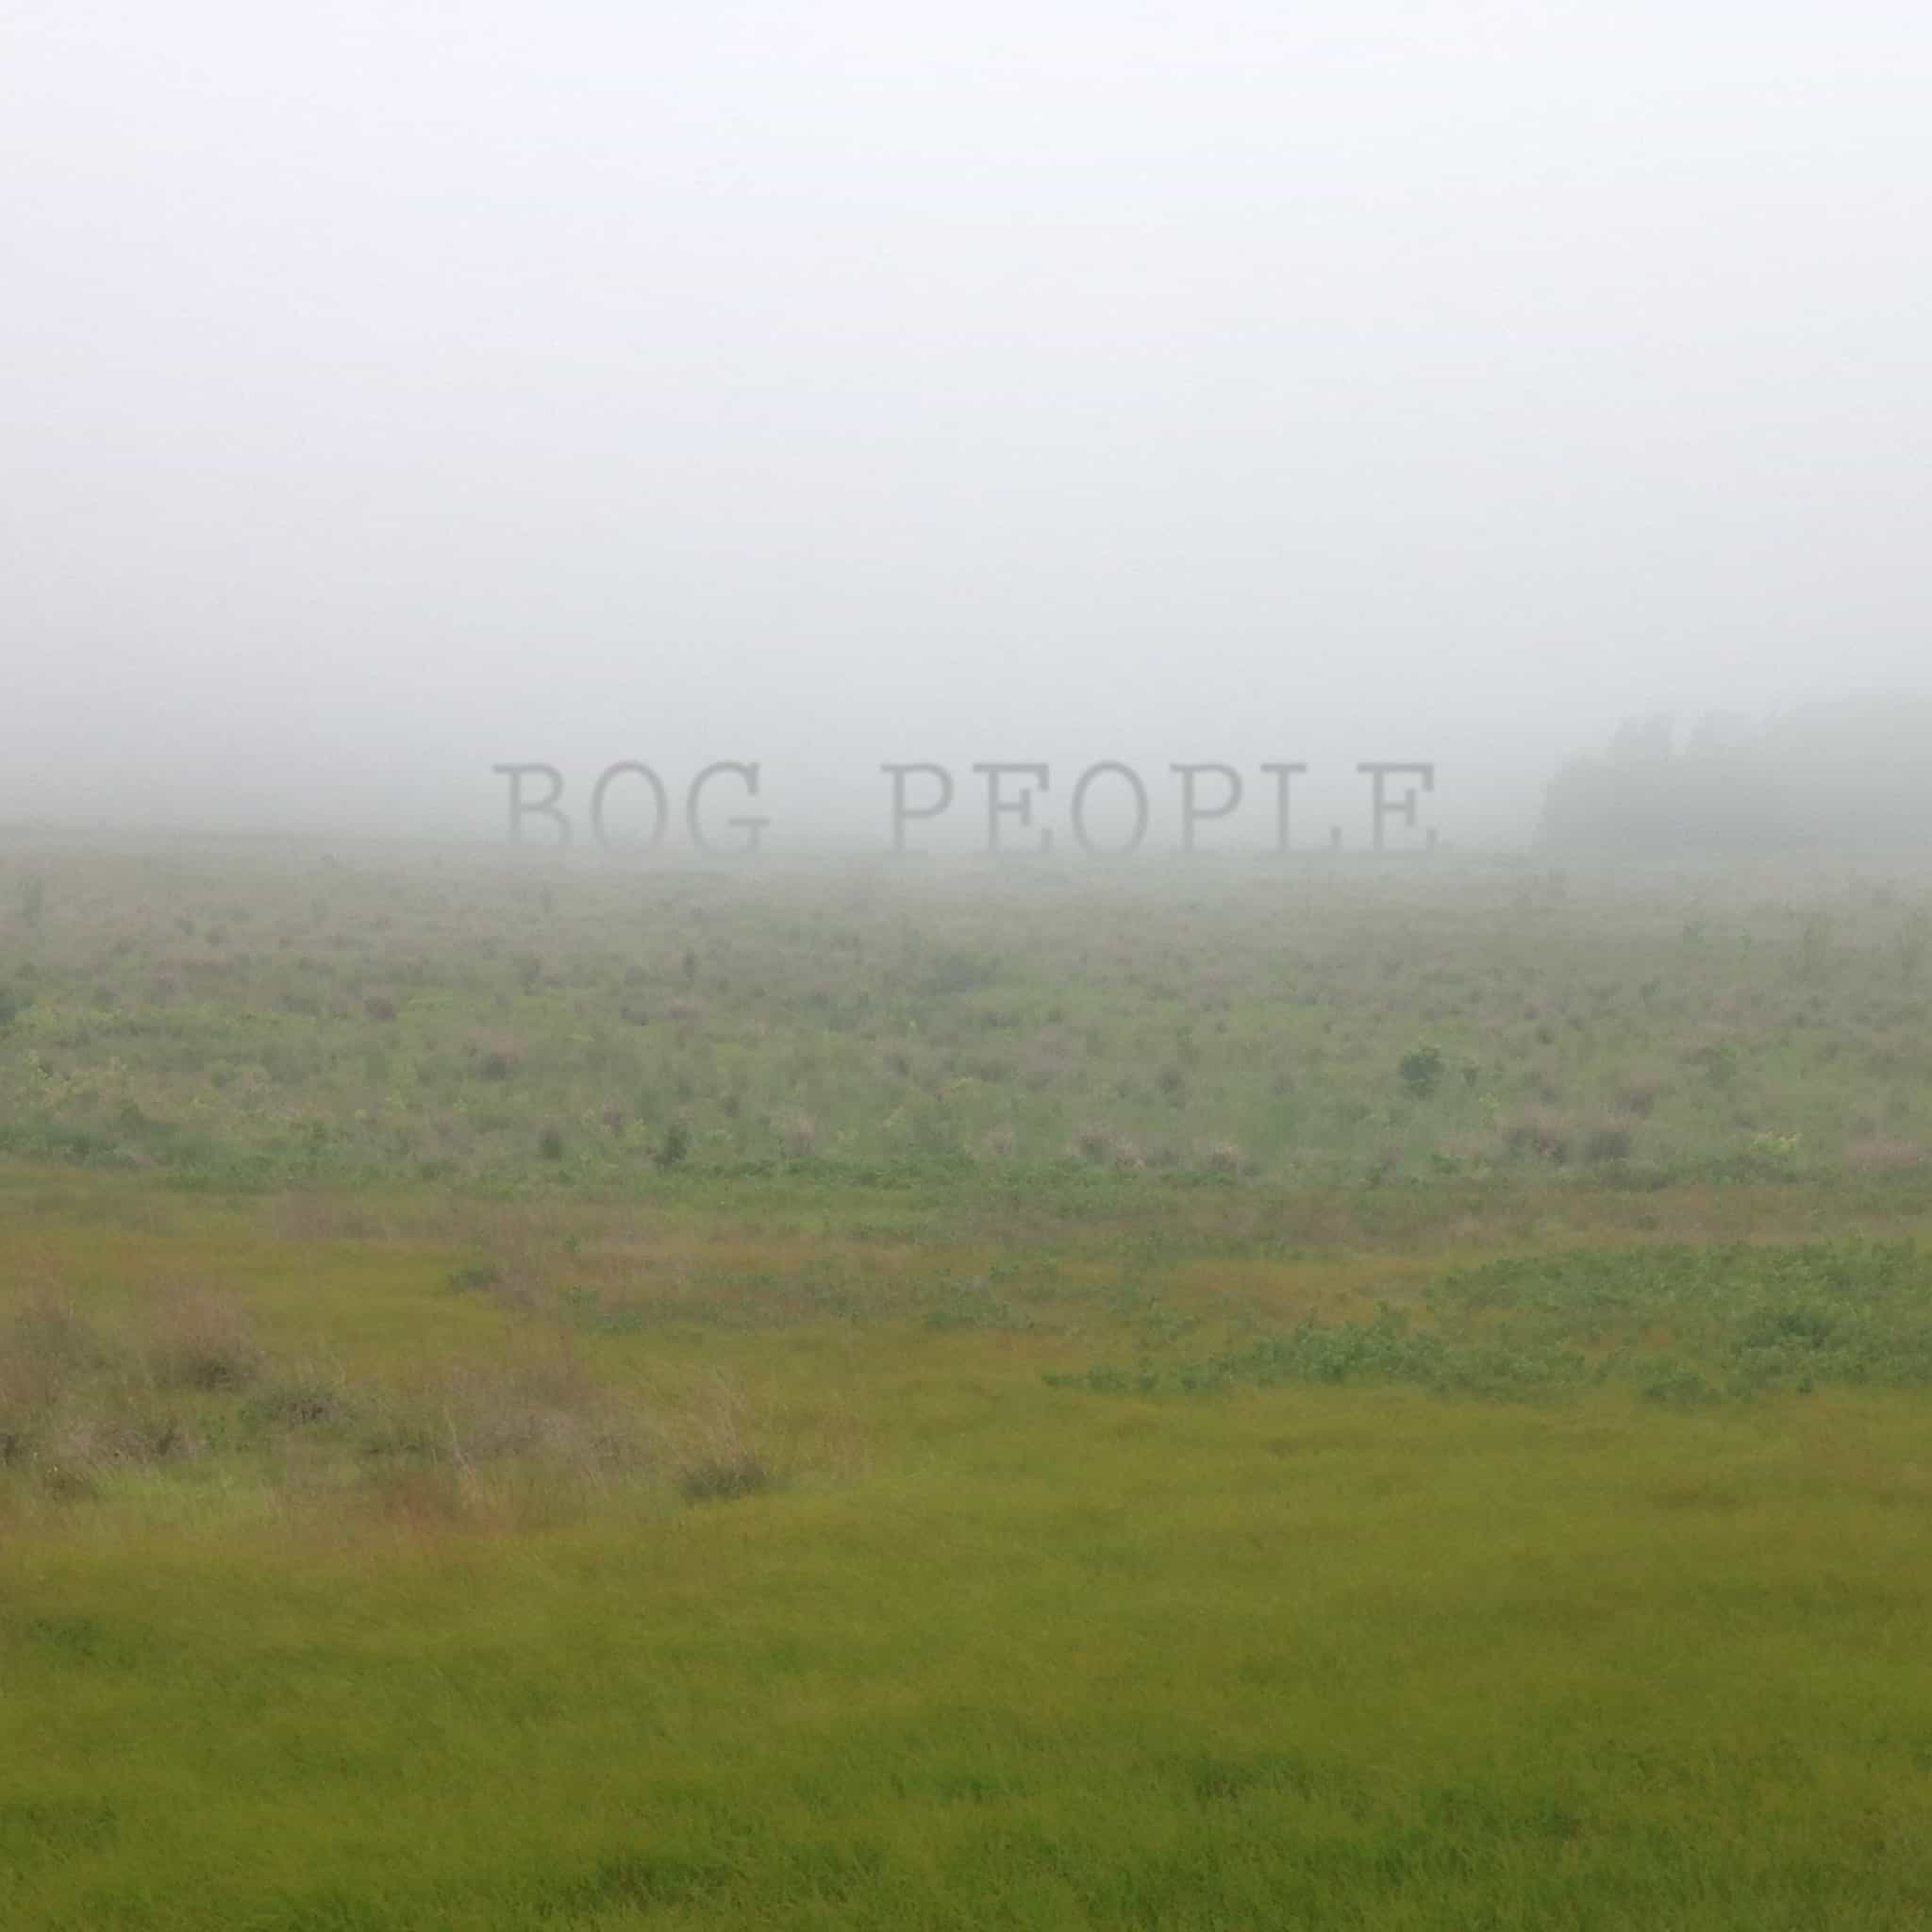 Bog People is one of Halsey's site specific sound installations